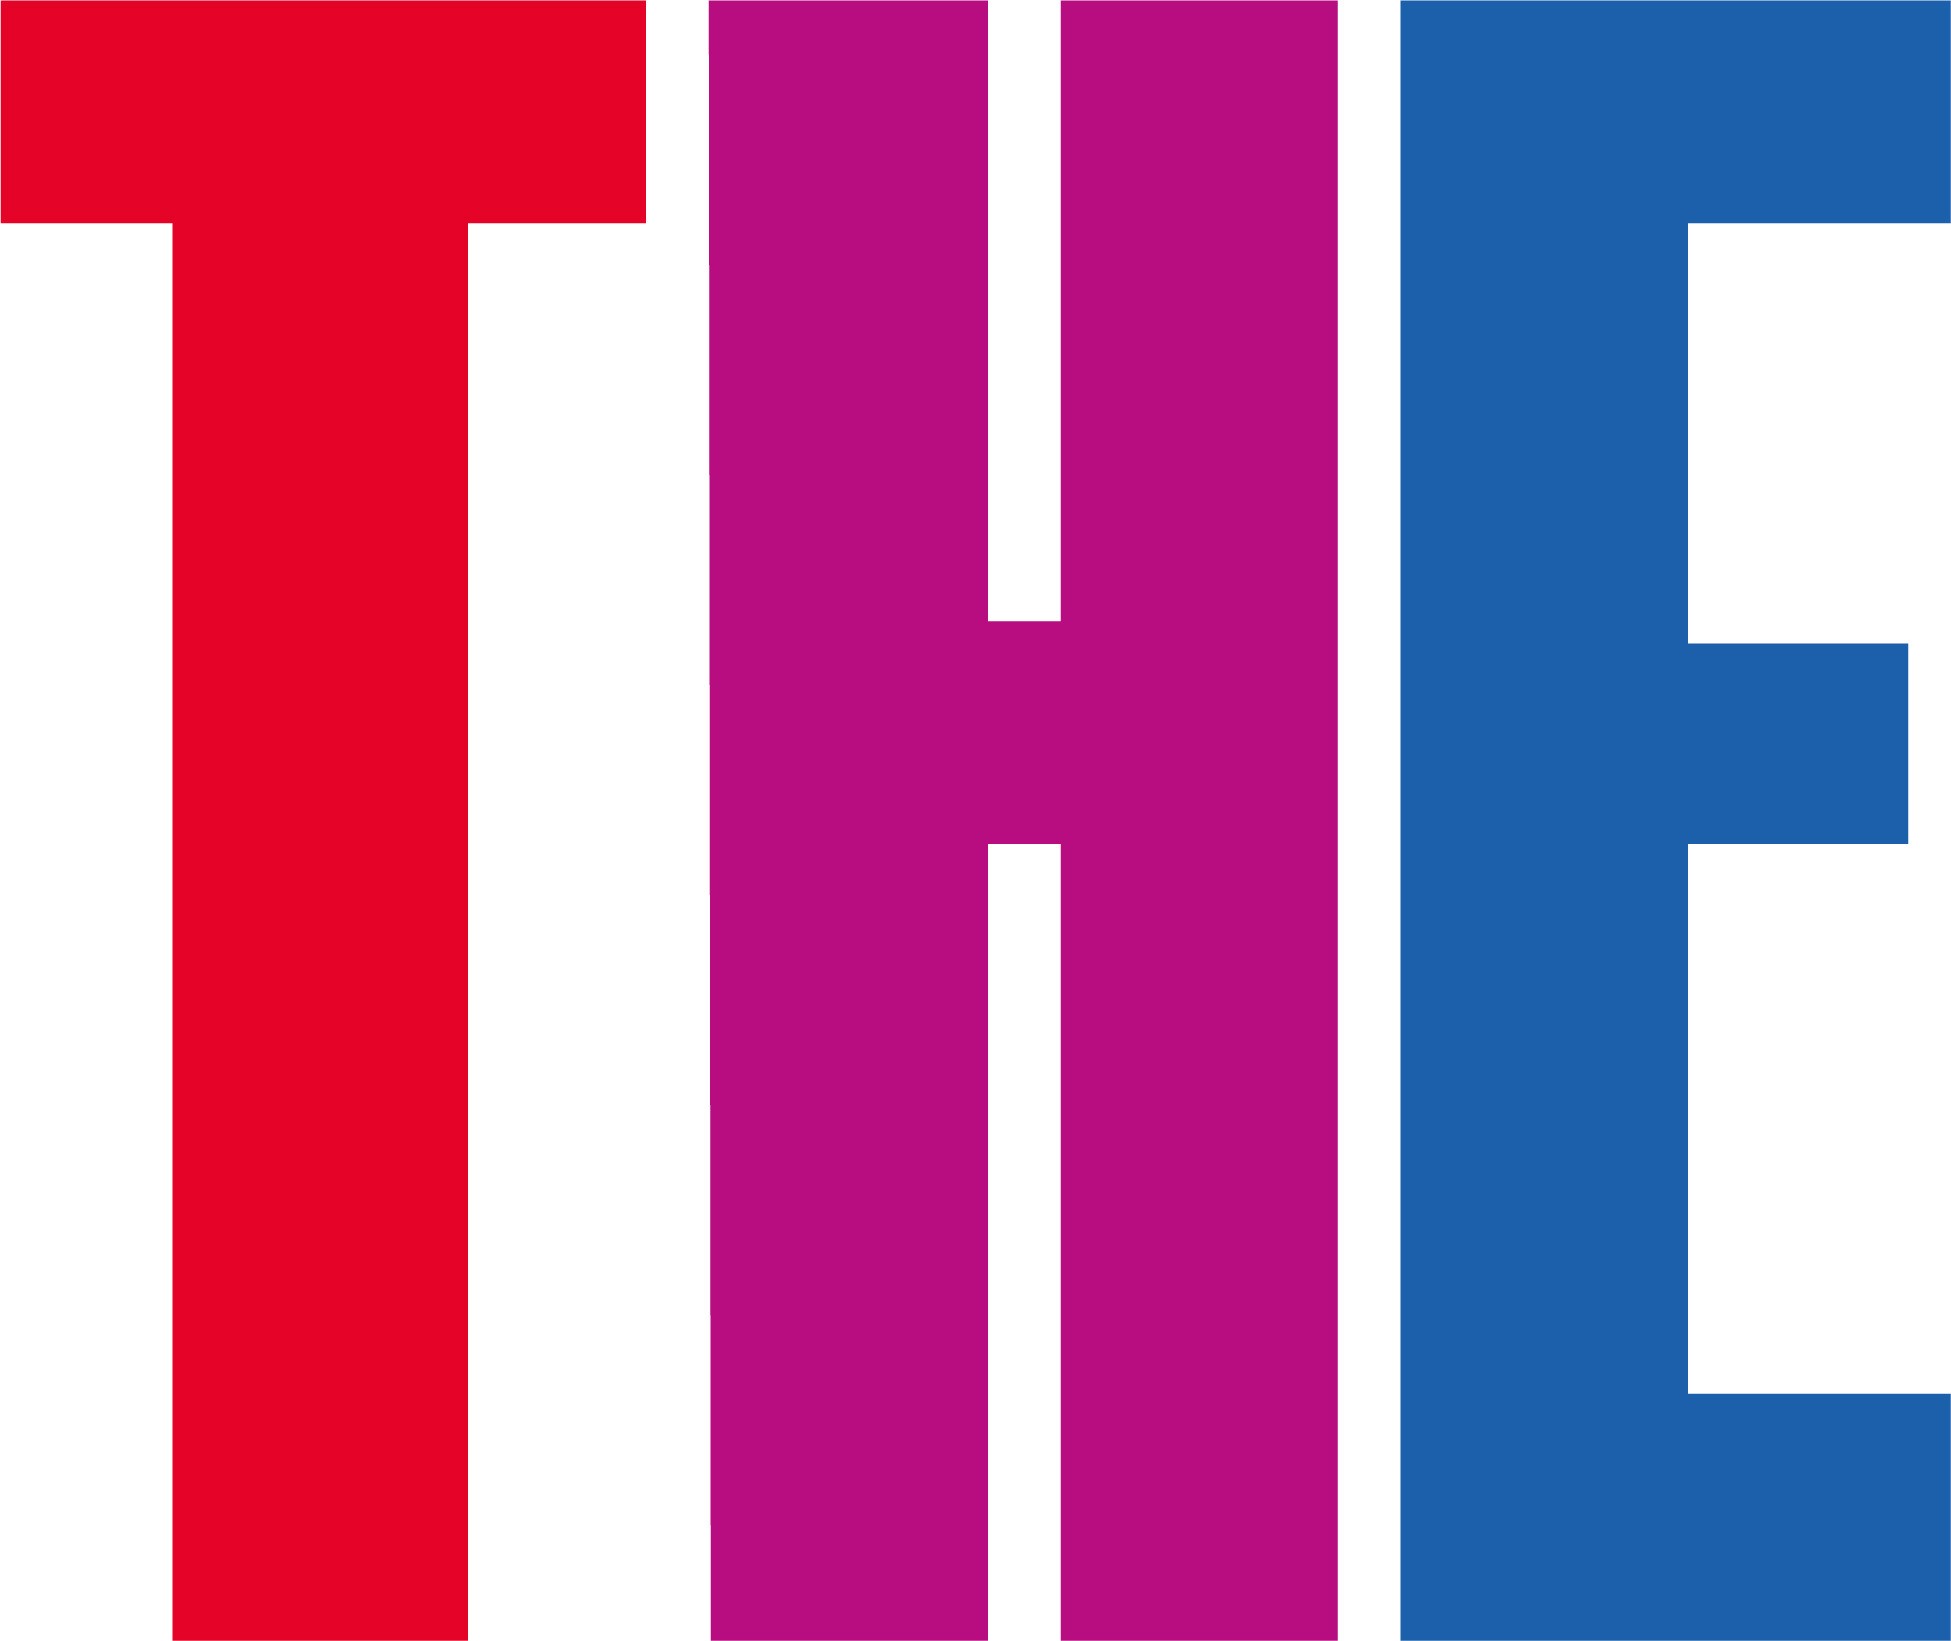 With the Times Higher Education logo, a red T, a purple H and a blue E.